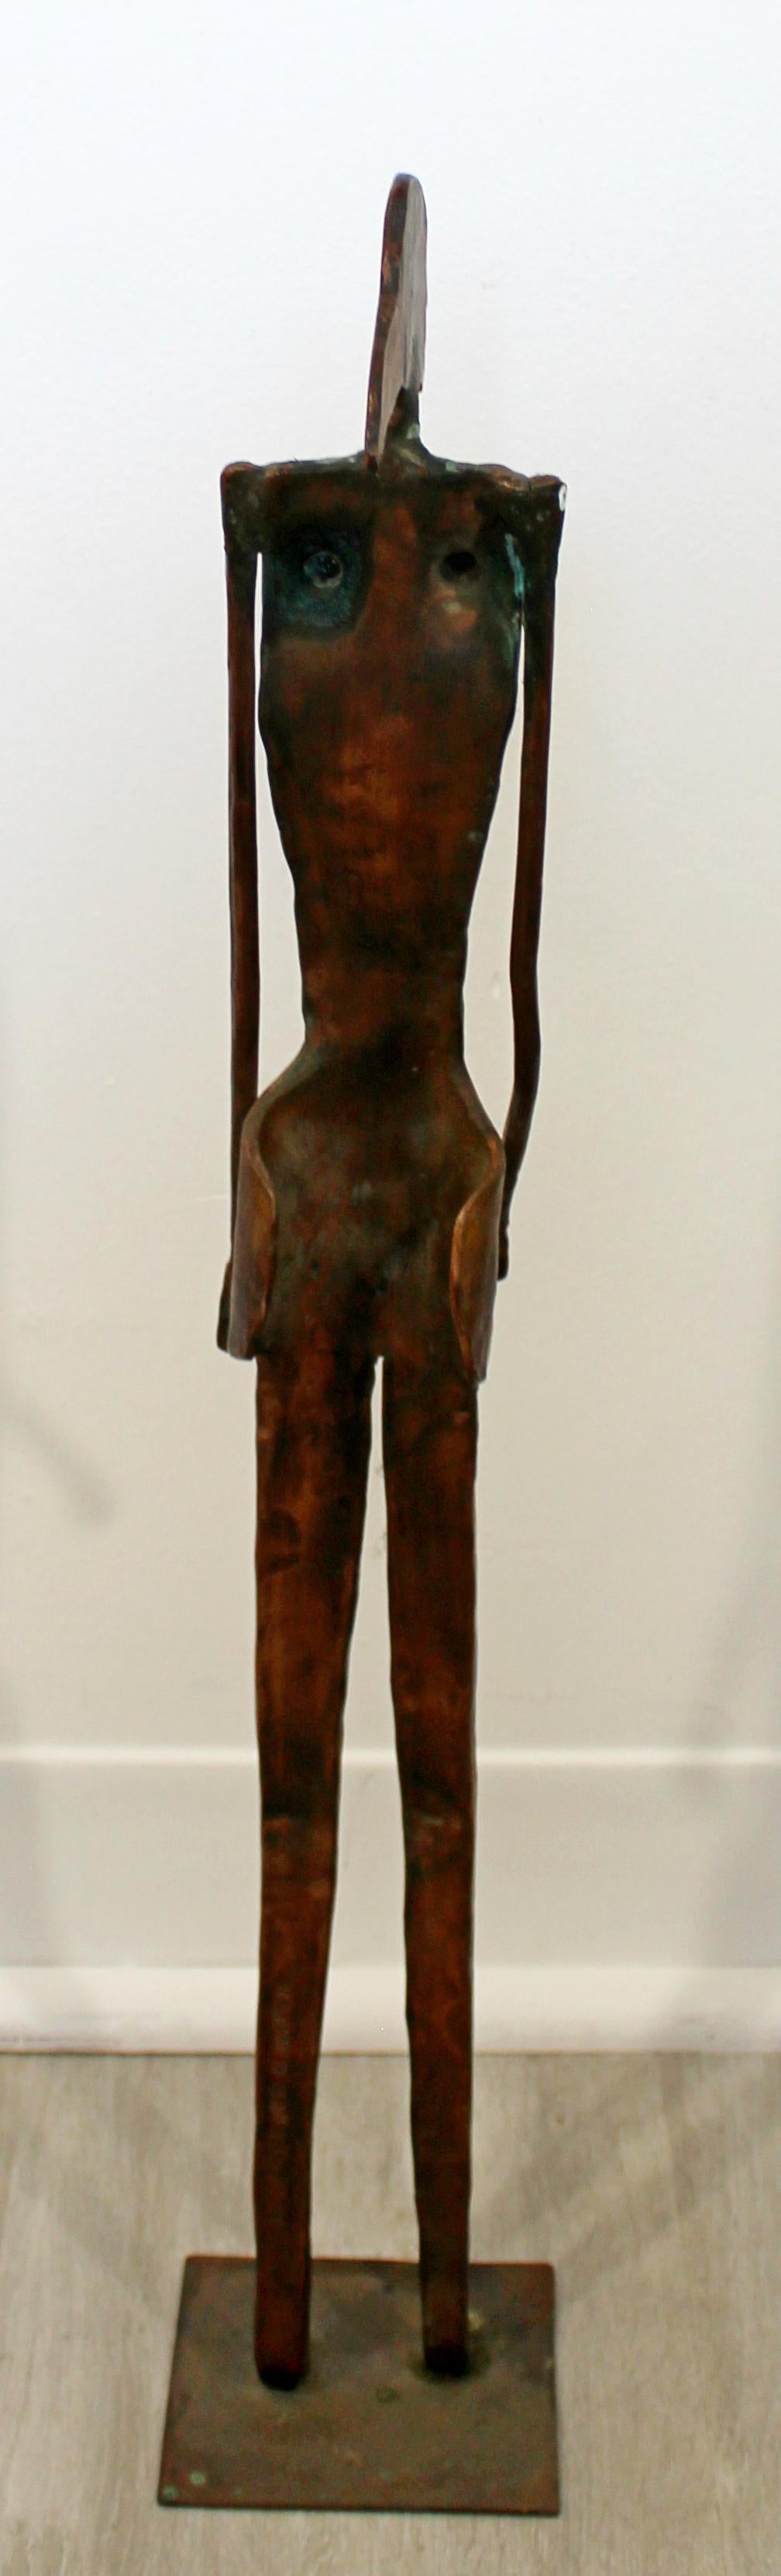 Metal Contemporary Forged Copper Female Nude Figure Table Sculpture Signed Hansen 2001 For Sale